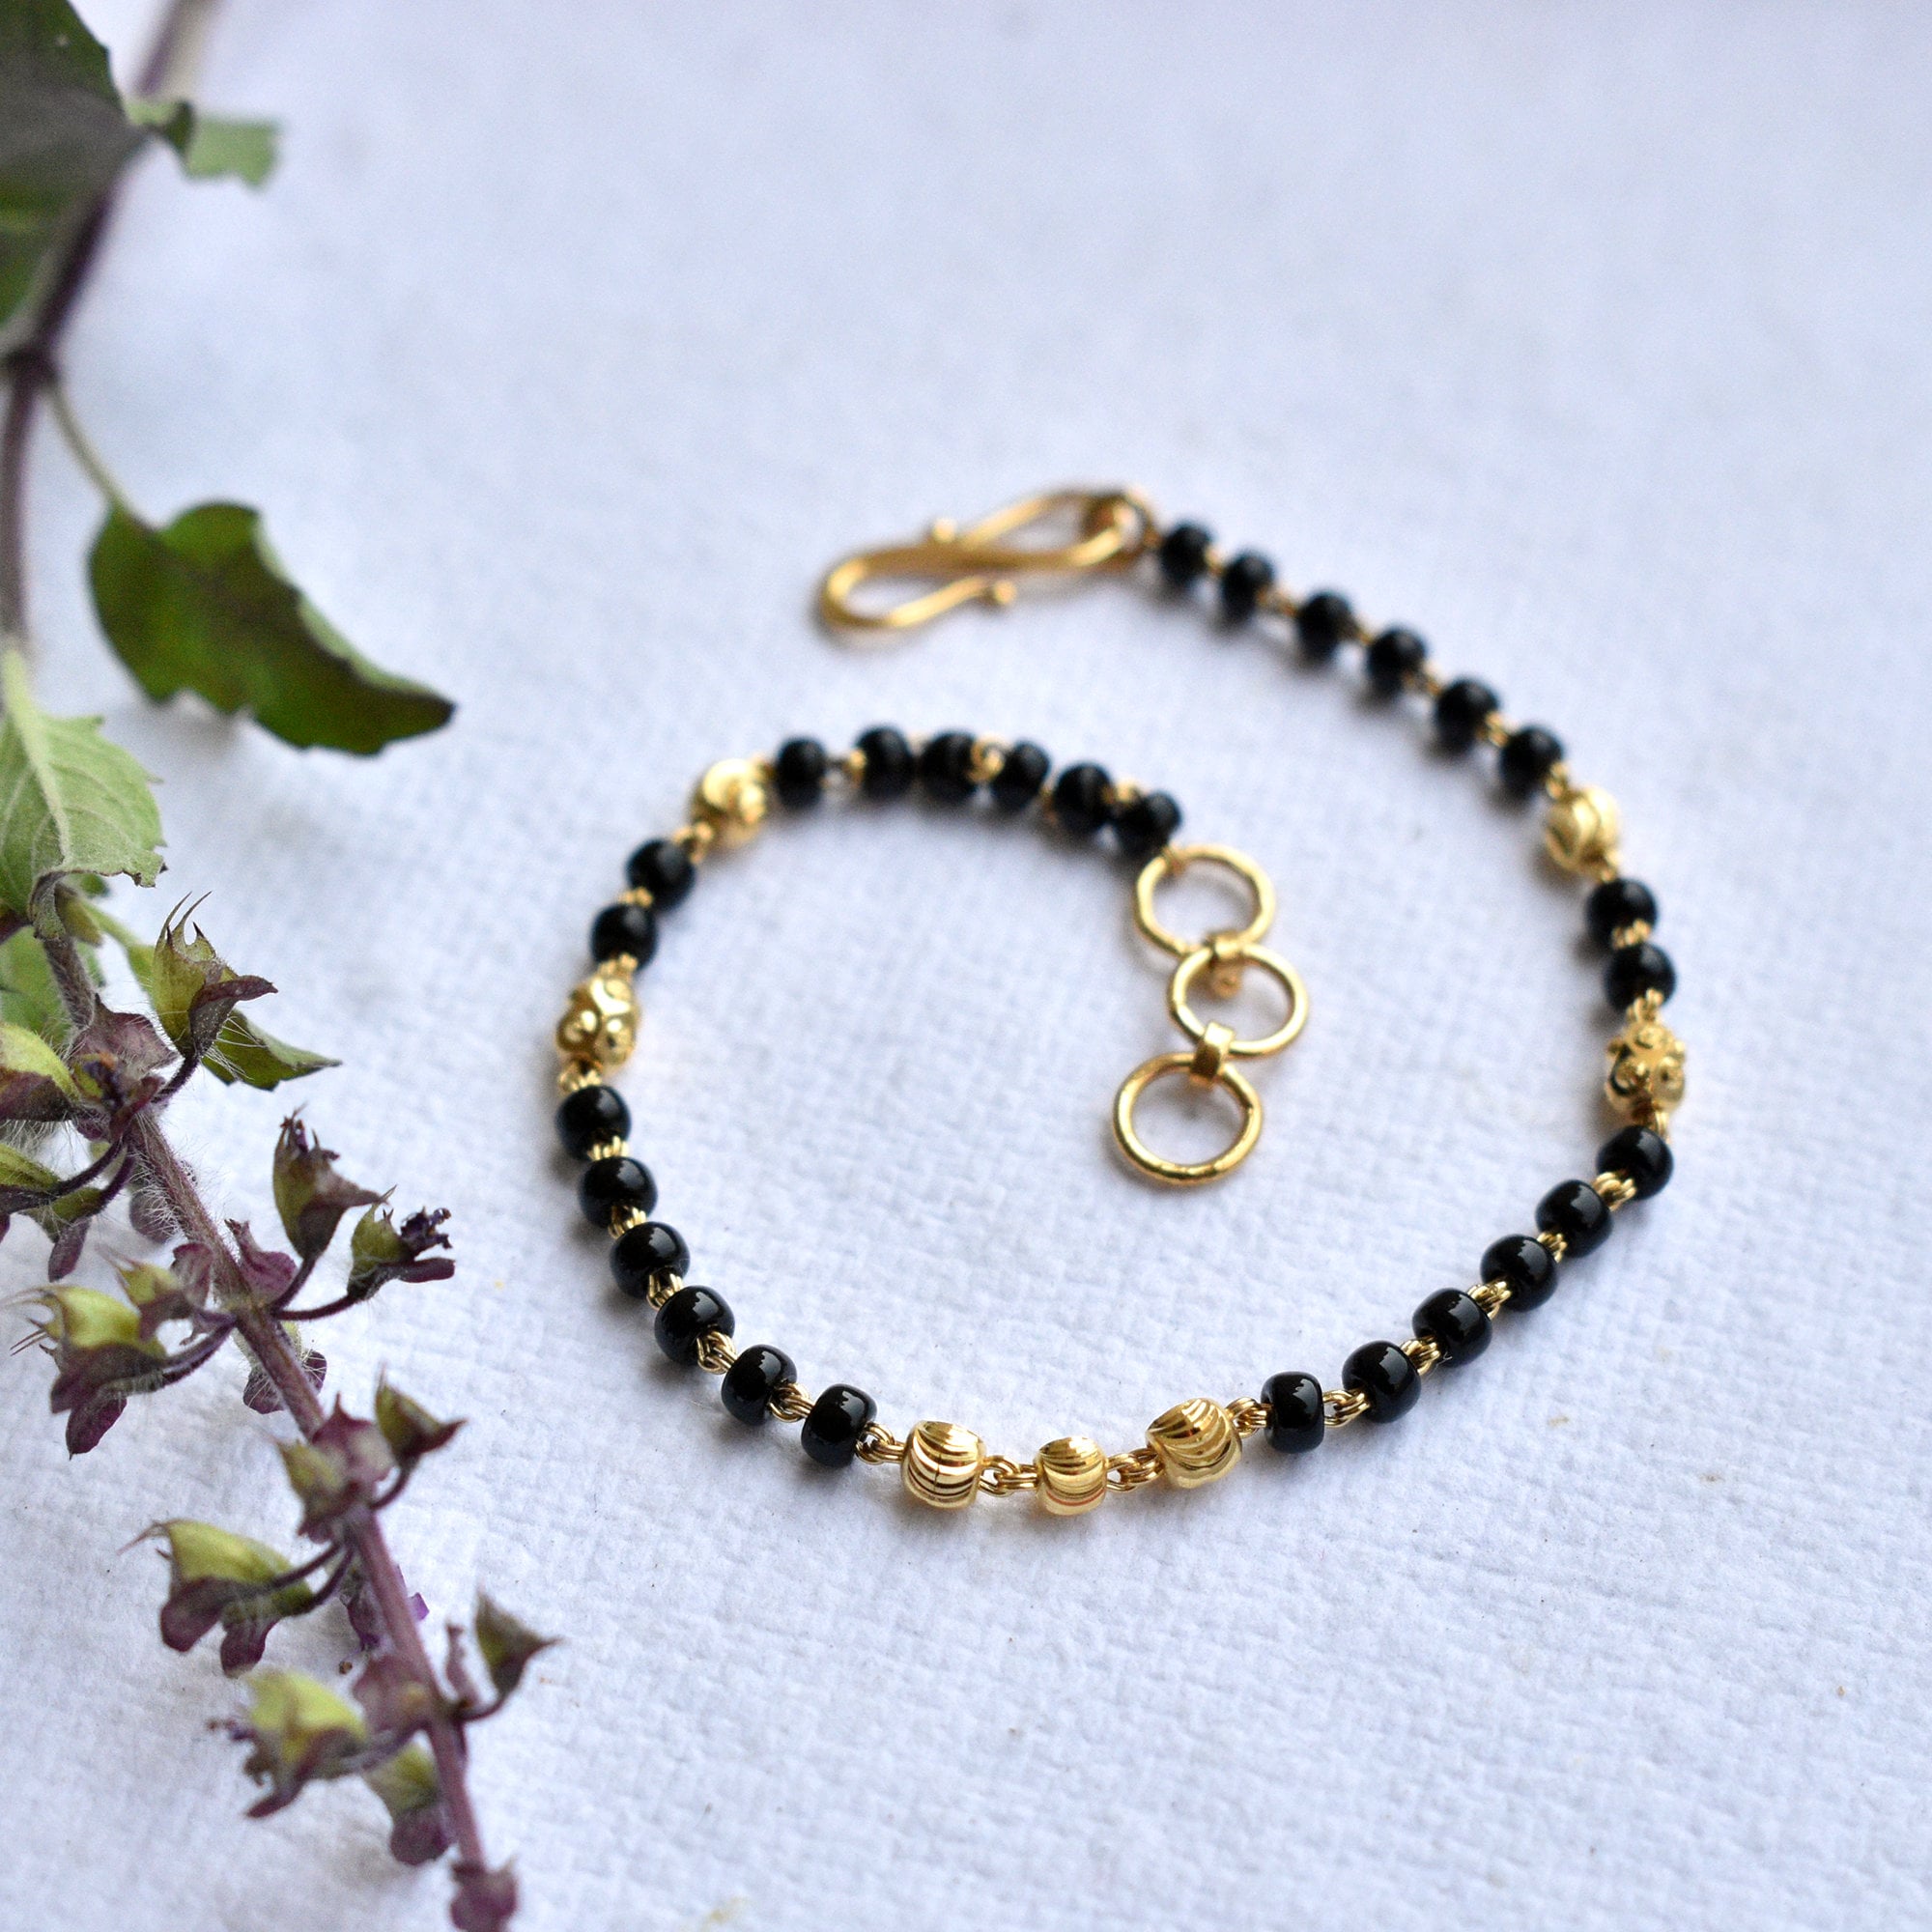 18K Solid Yellow Gold SINGLE Strand Mangalsutra Bracelet with Gold Chain and Black Beads, Indian Bridal Bracelet